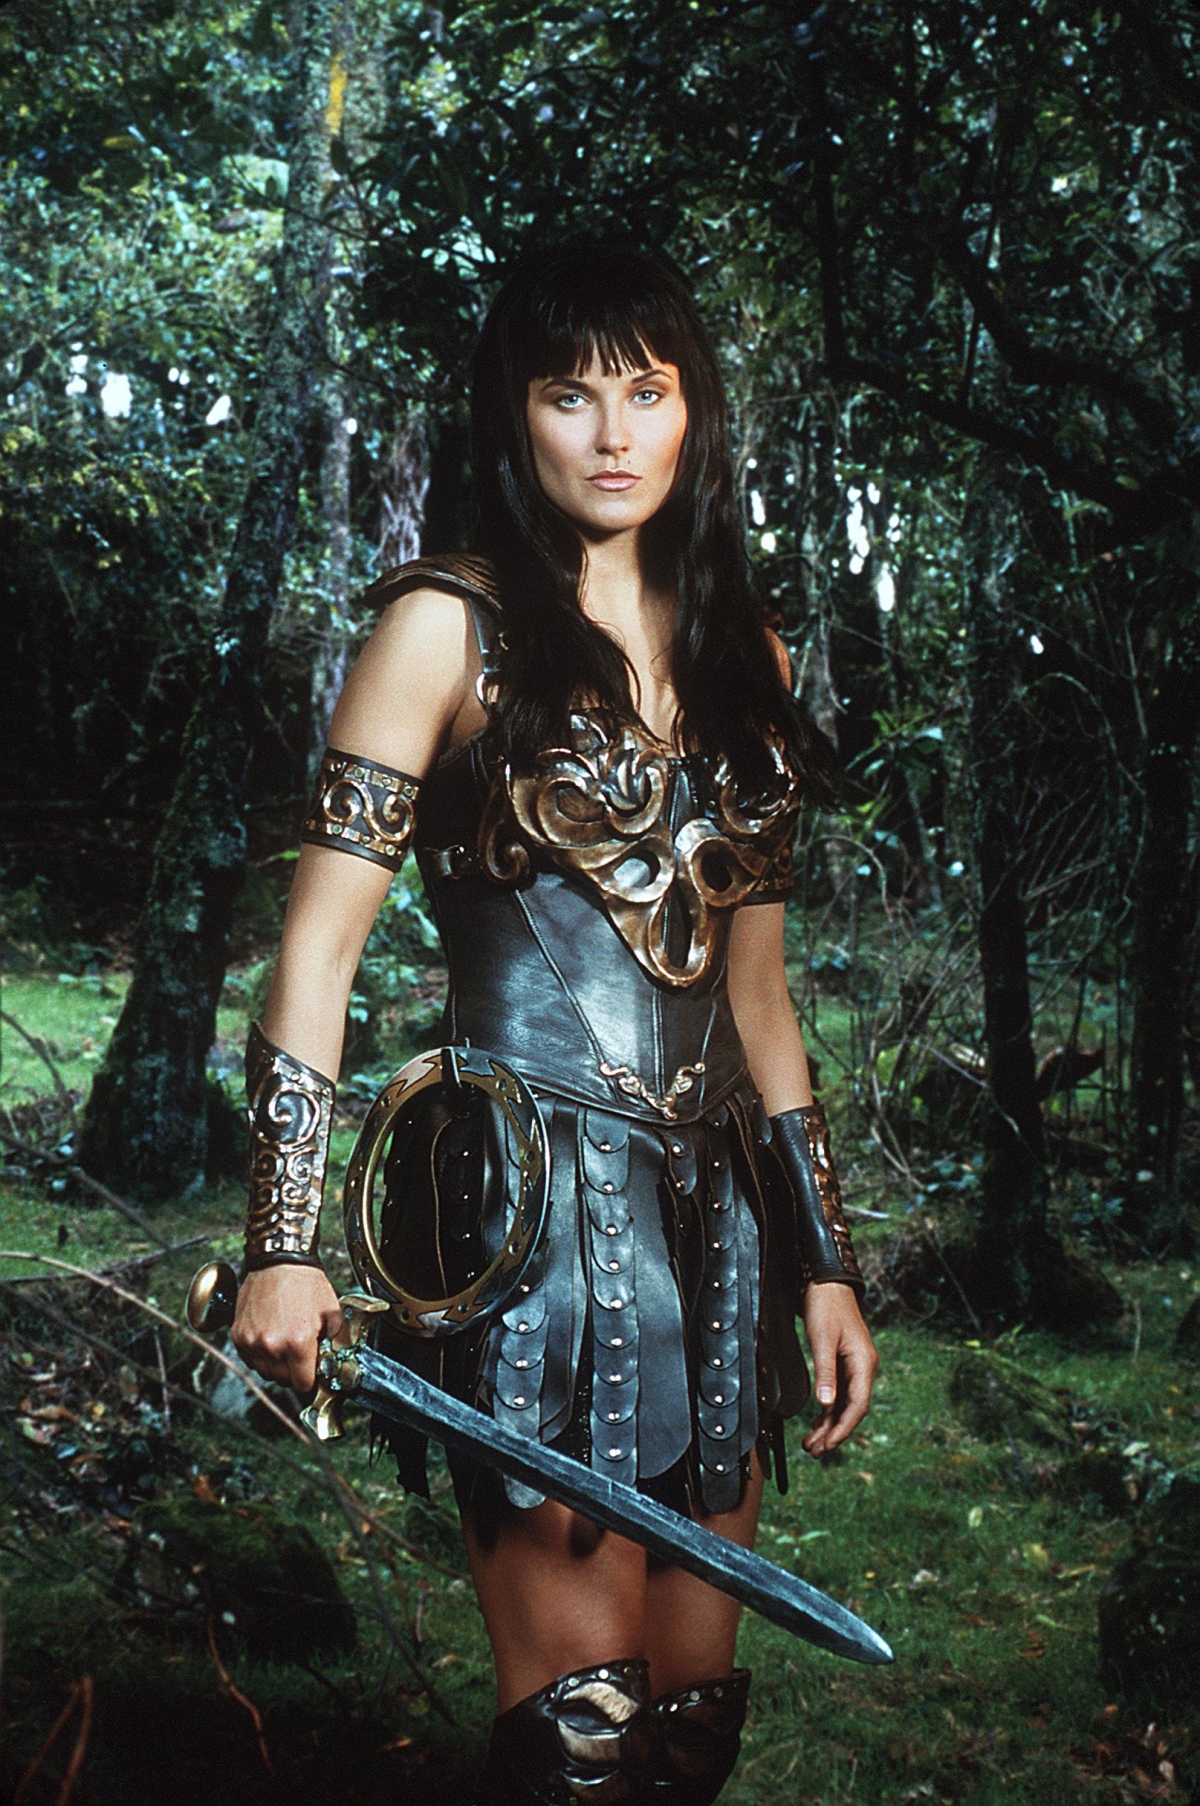 What An Out Lesbian Xena Warrior Princess Would Mean To The Lgbtqi